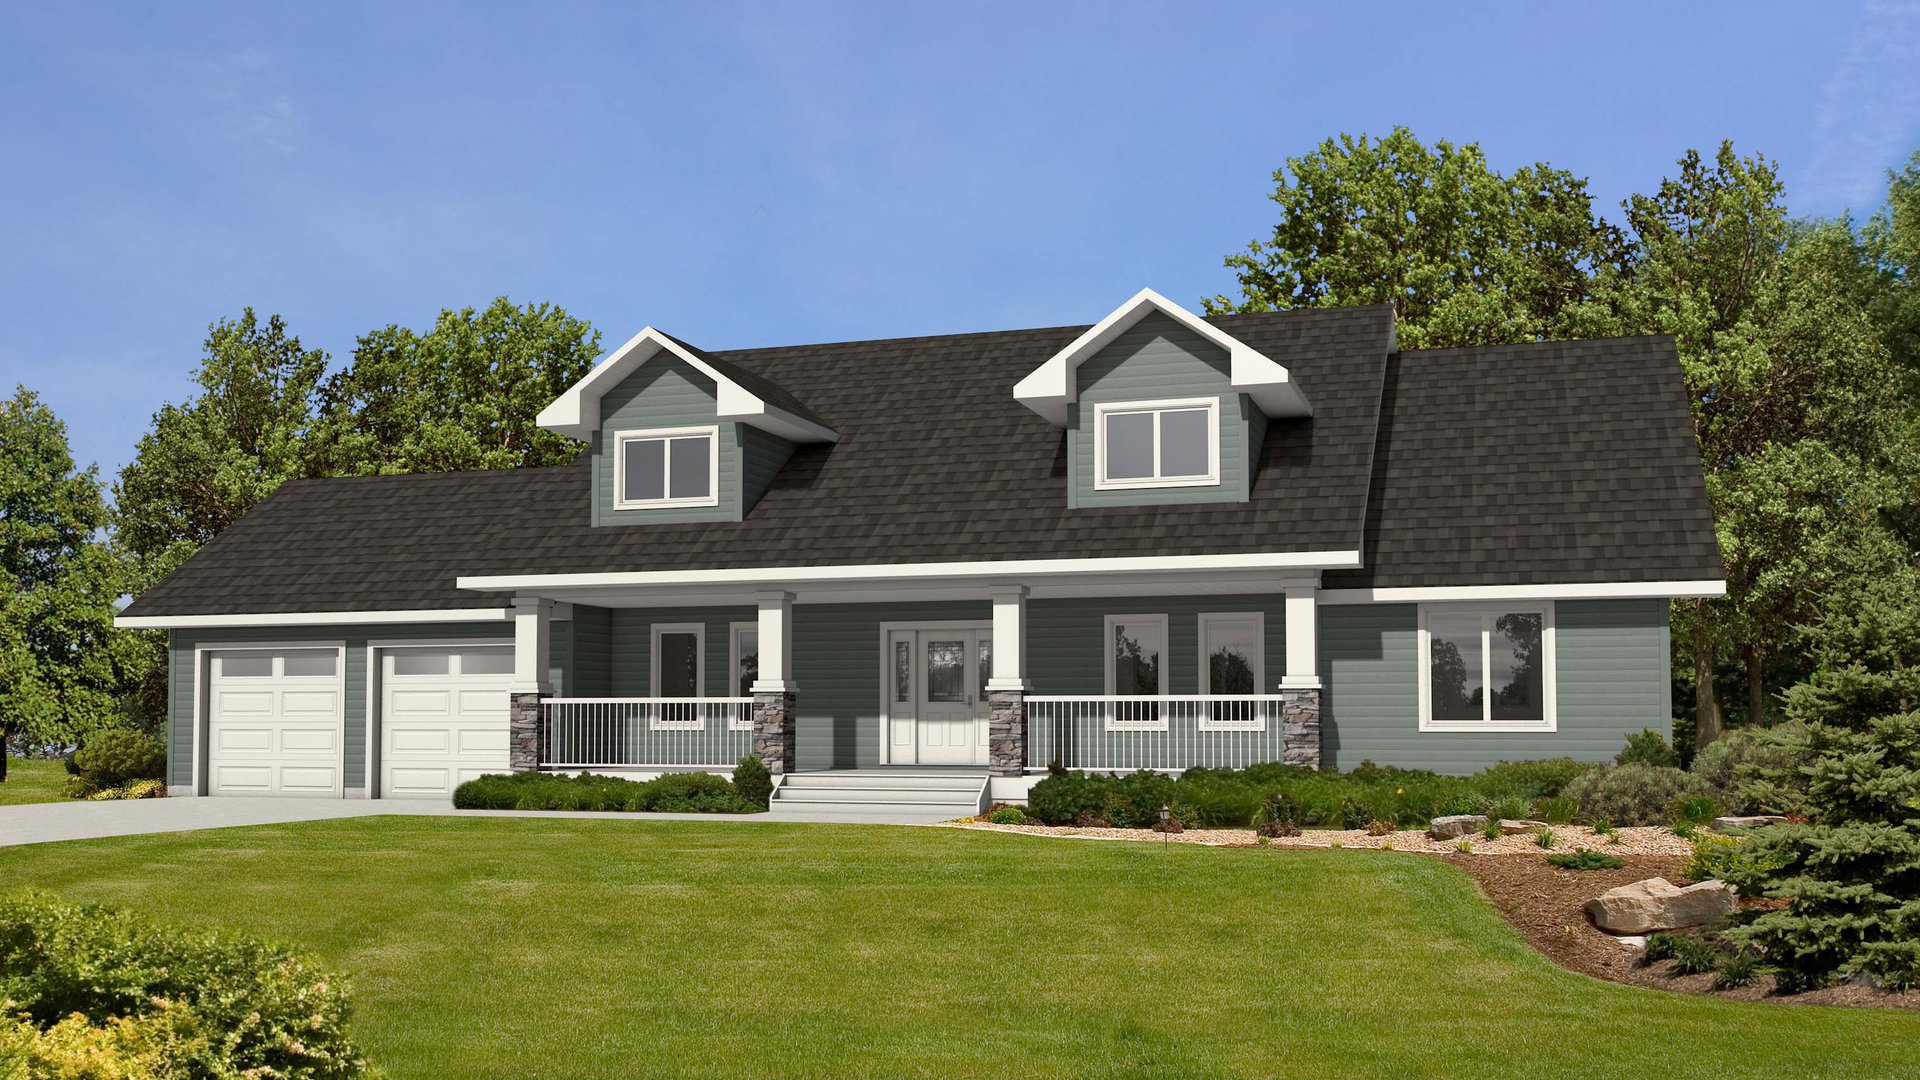 Leighton house plan modular homes nelson homes ready to move homes prefabricated home packages.jpg